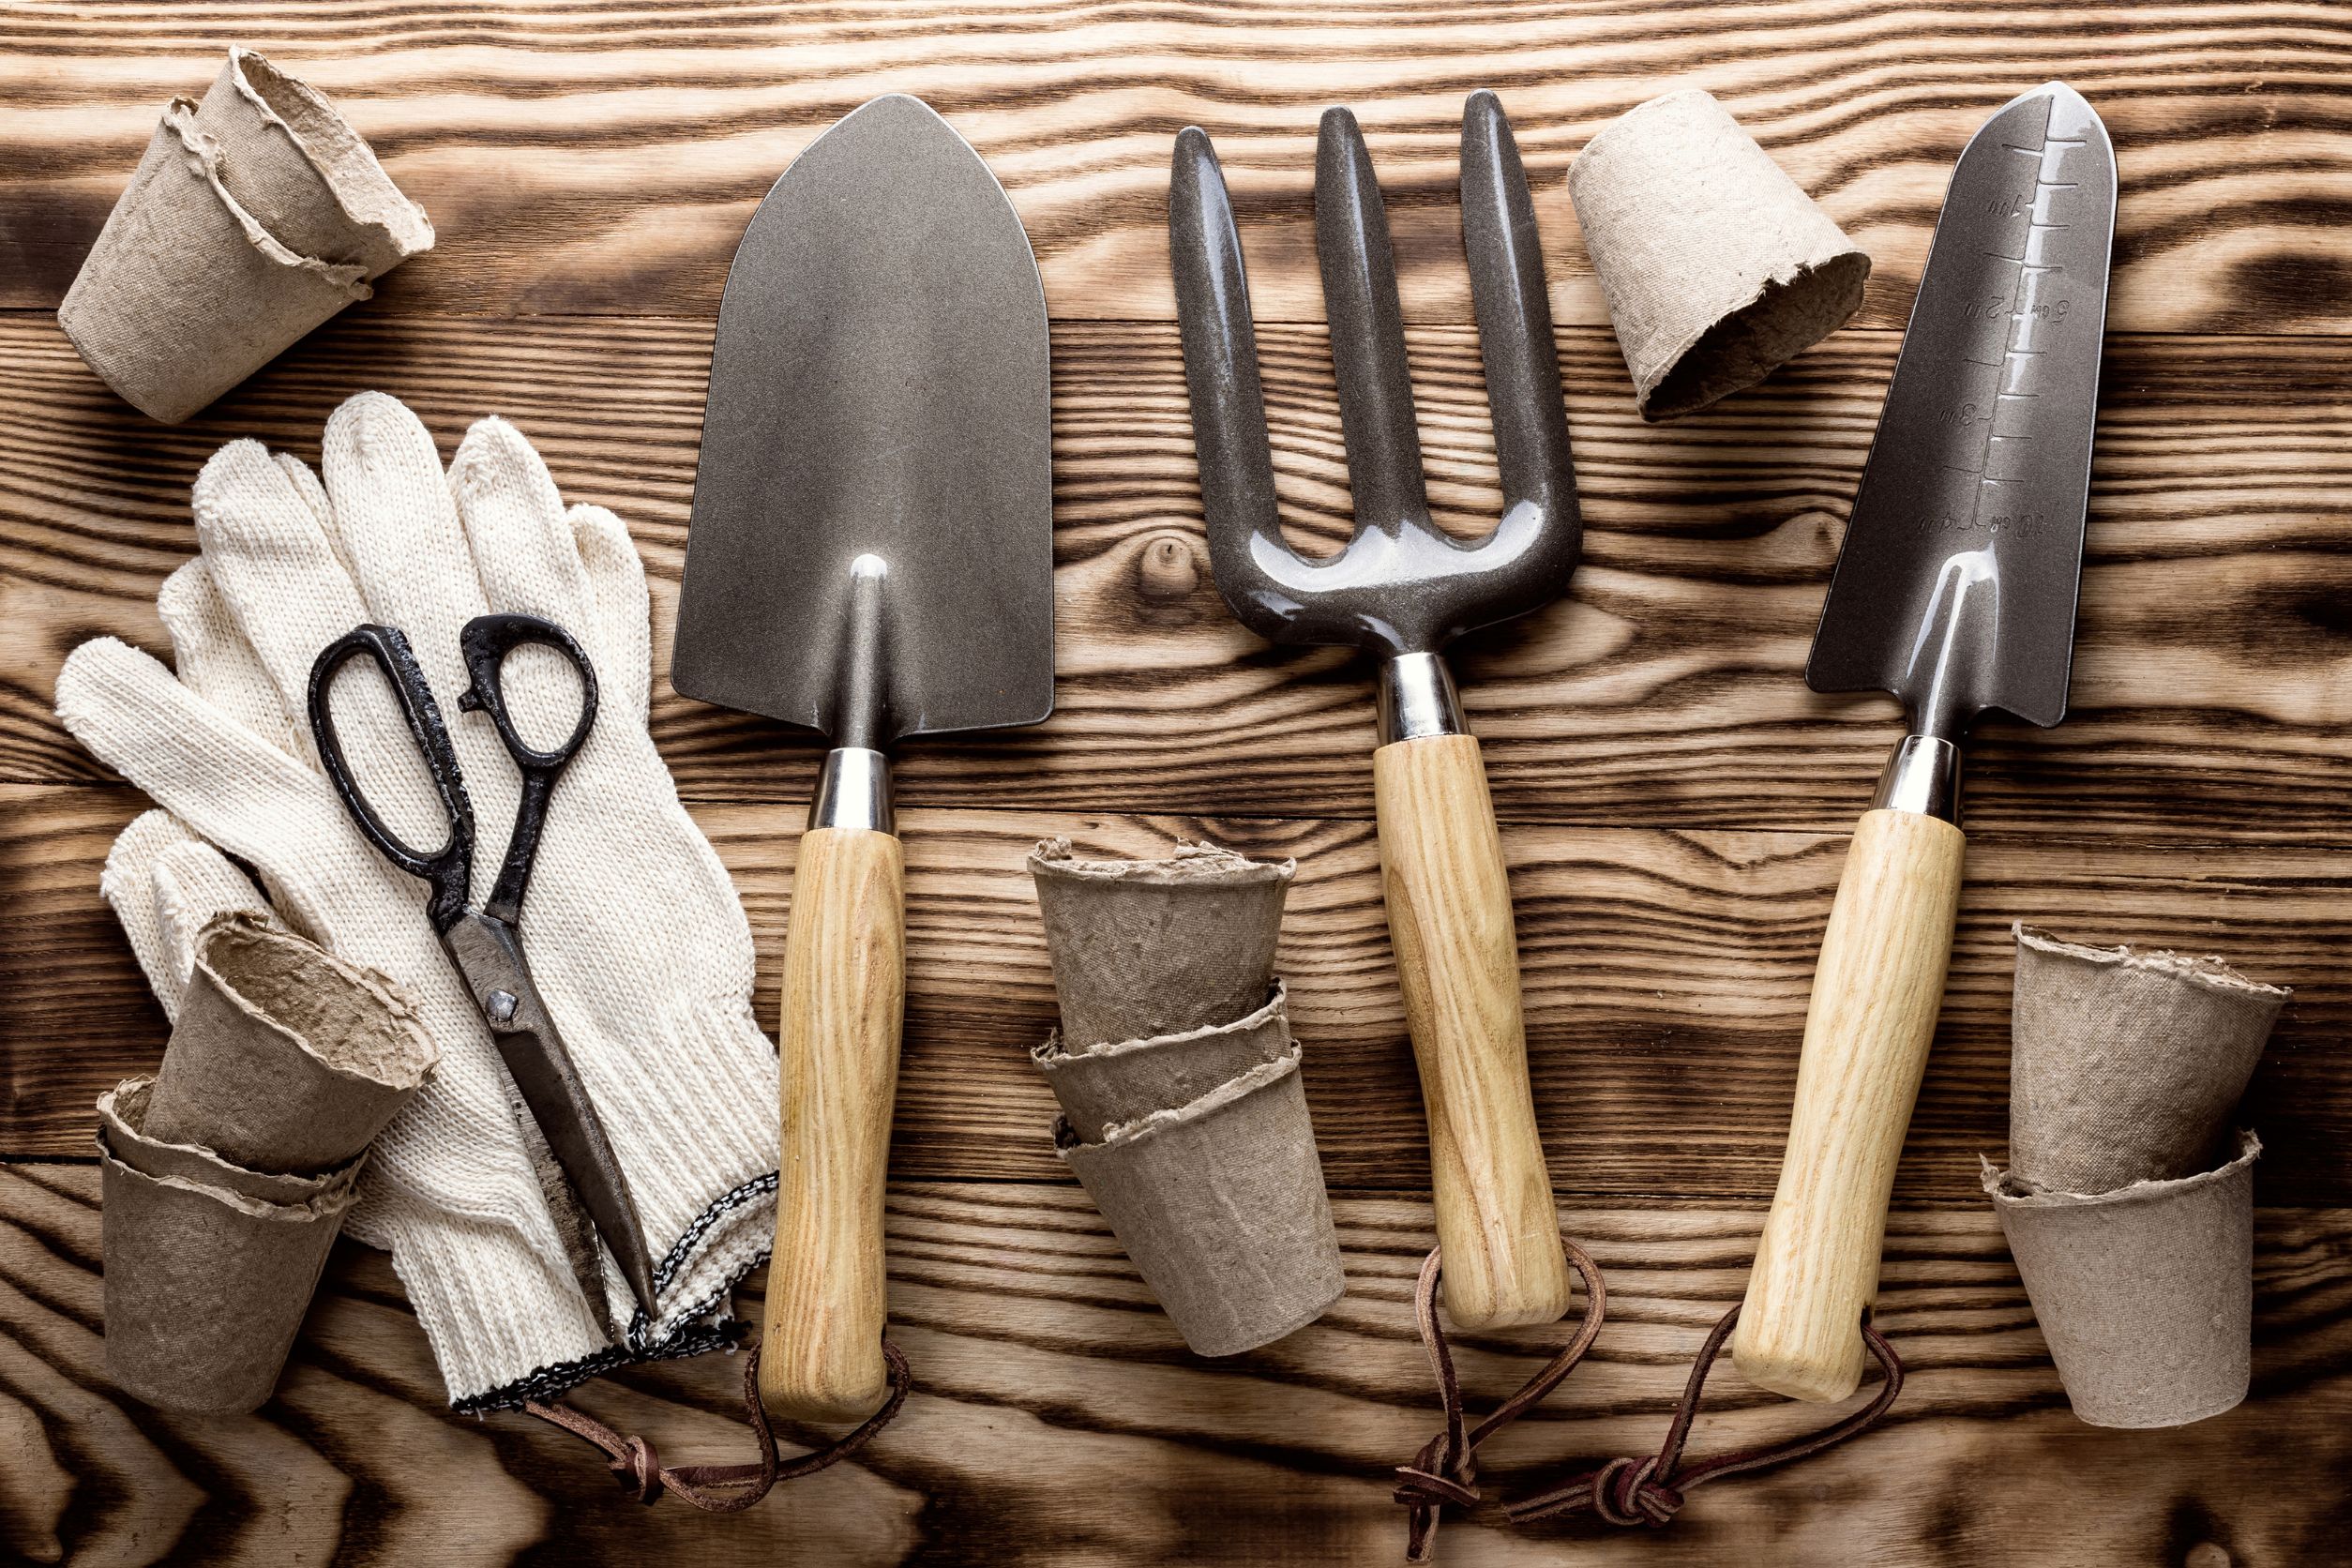 Top 10 Cheap Gardening Tools That Every Gardener Needs in Their Shed